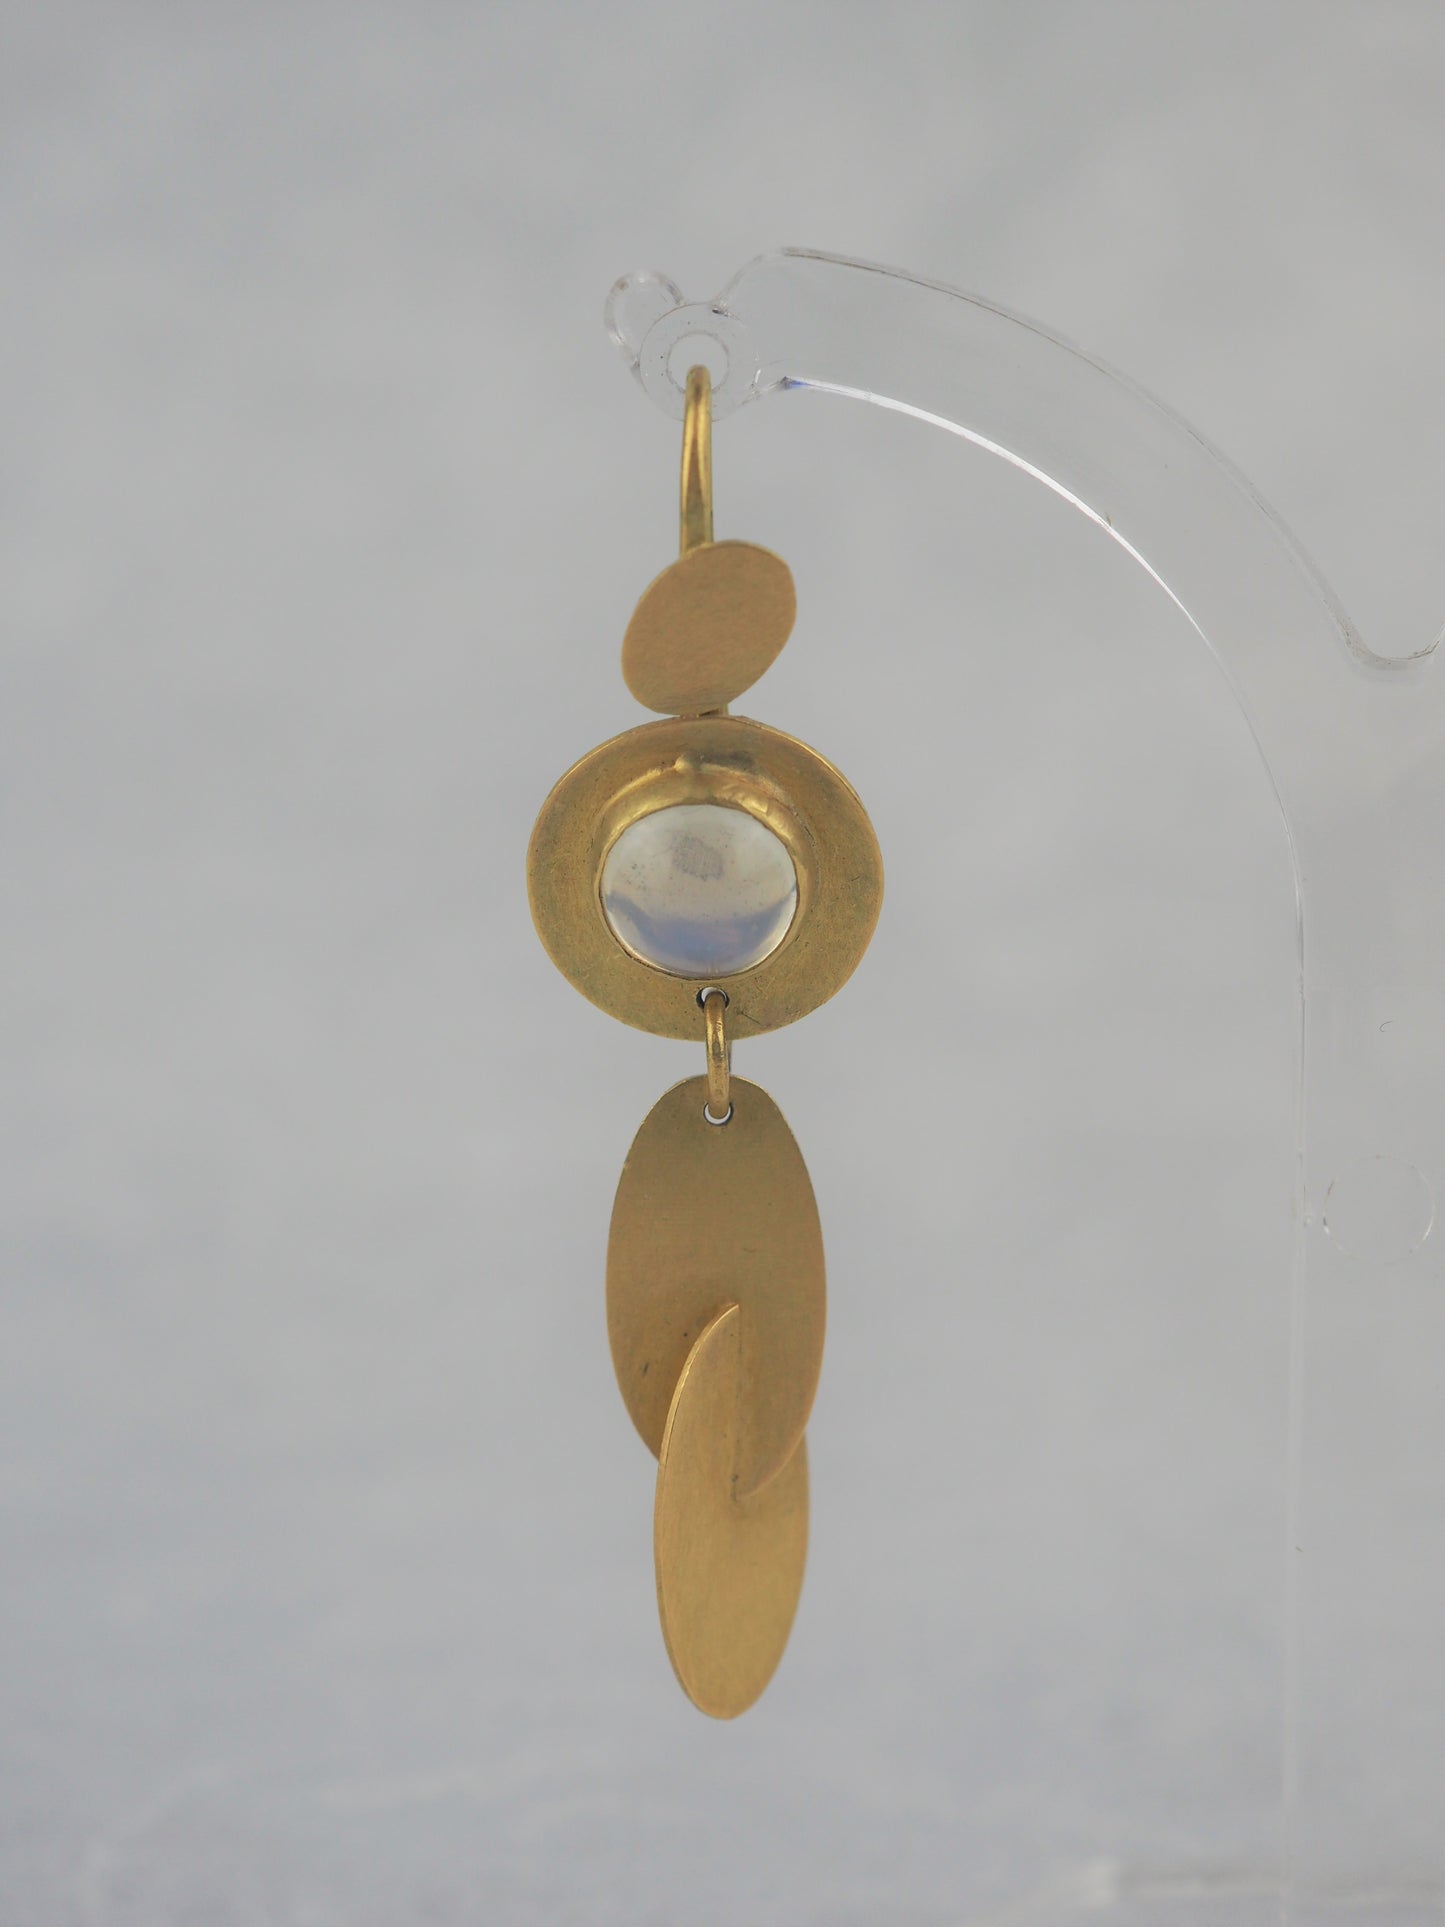 Krinos, Daphne – Gold and Moonstone Earrings